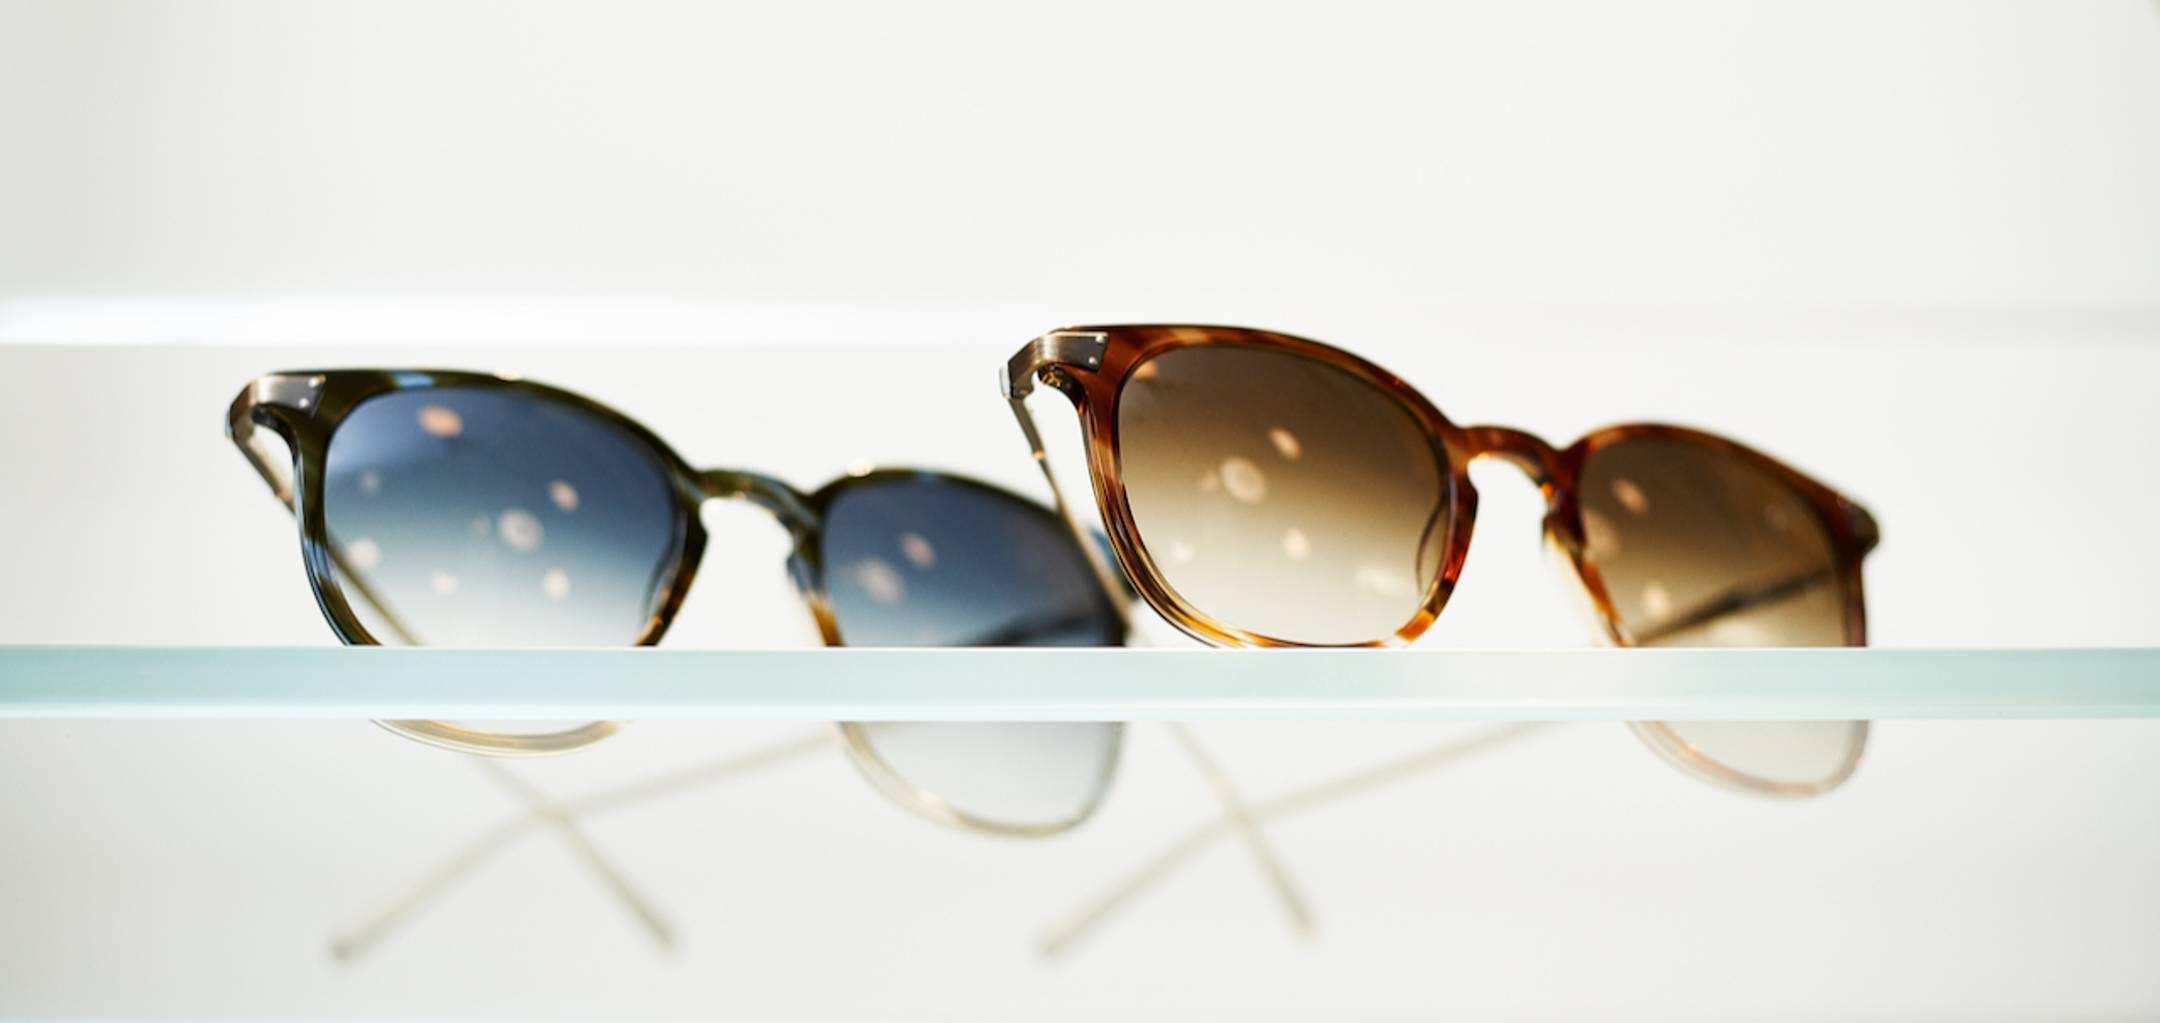 Close up of two pairs of sunglasses